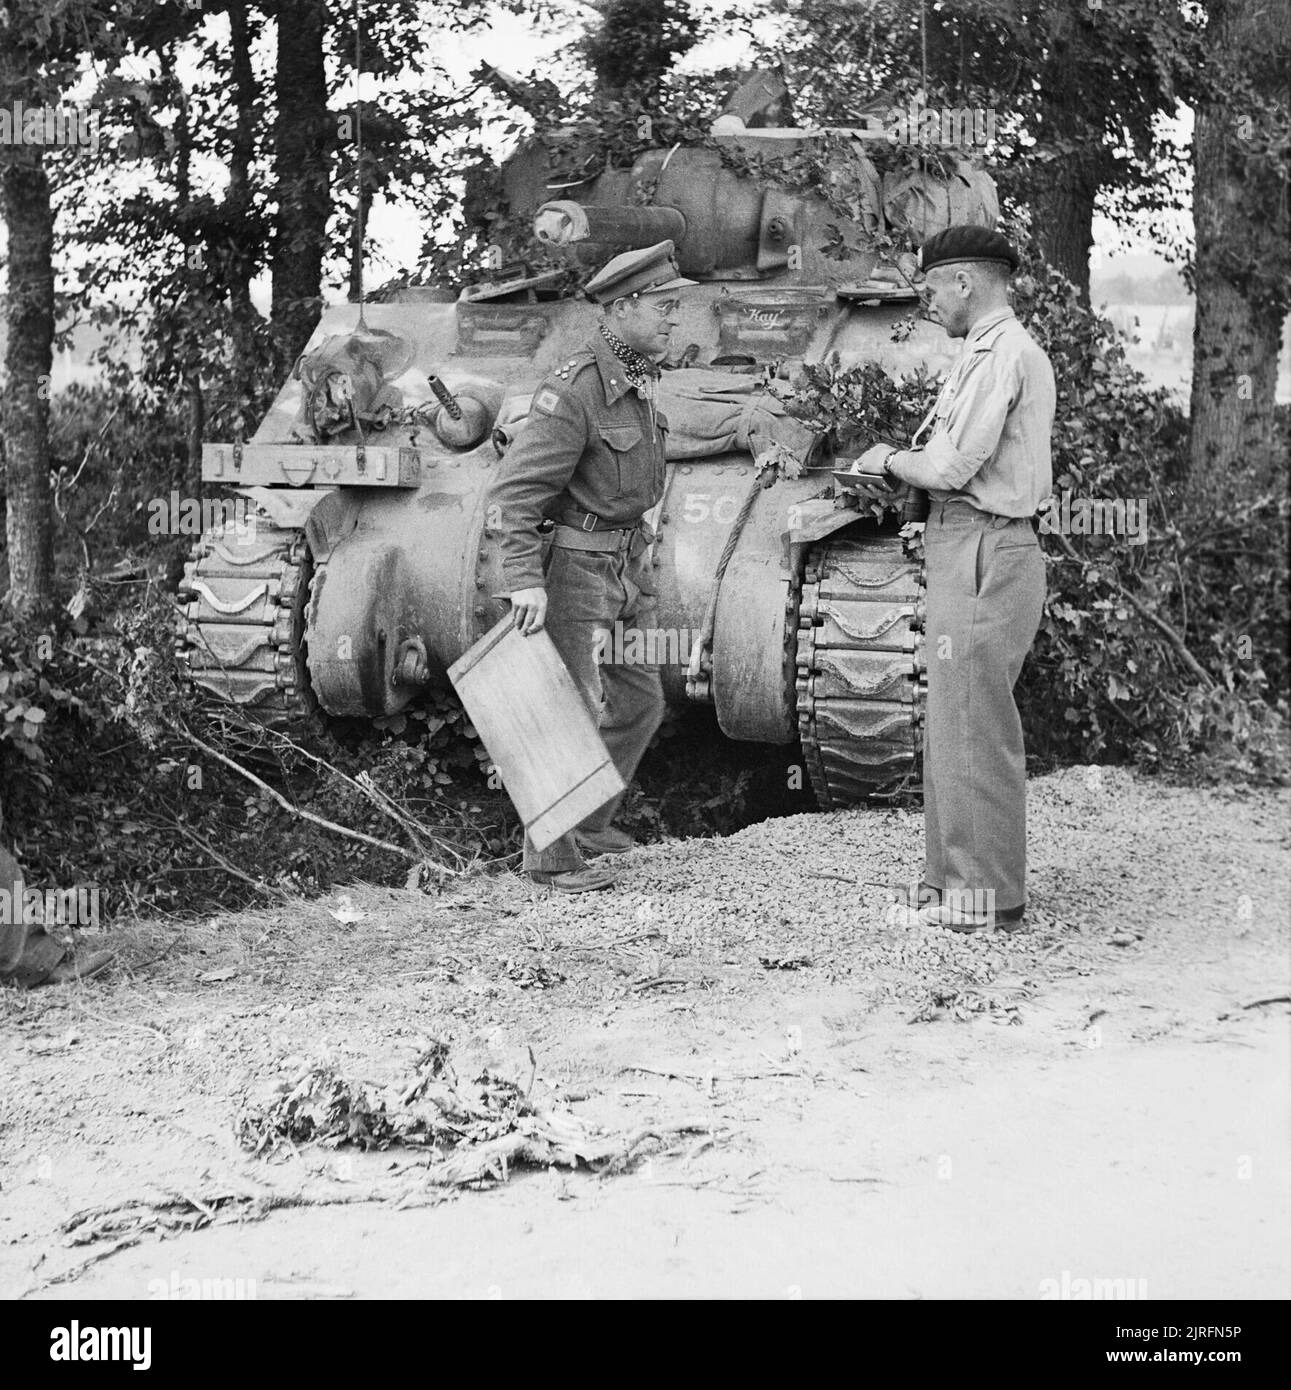 Major General George 'Pip' Roberts (right), commanding 11th Armoured Division, with Brigadier Roscoe Harvey of 29th Armoured Brigade, and a Sherman command tank, Normandy, 15 August 1944. 11th Armoured Division: Major General 'Pip' Roberts, DSO, MC, with Brigadier Harvey, DSO and Bar, at the latter's Sherman command tank, in the forward area. Stock Photo